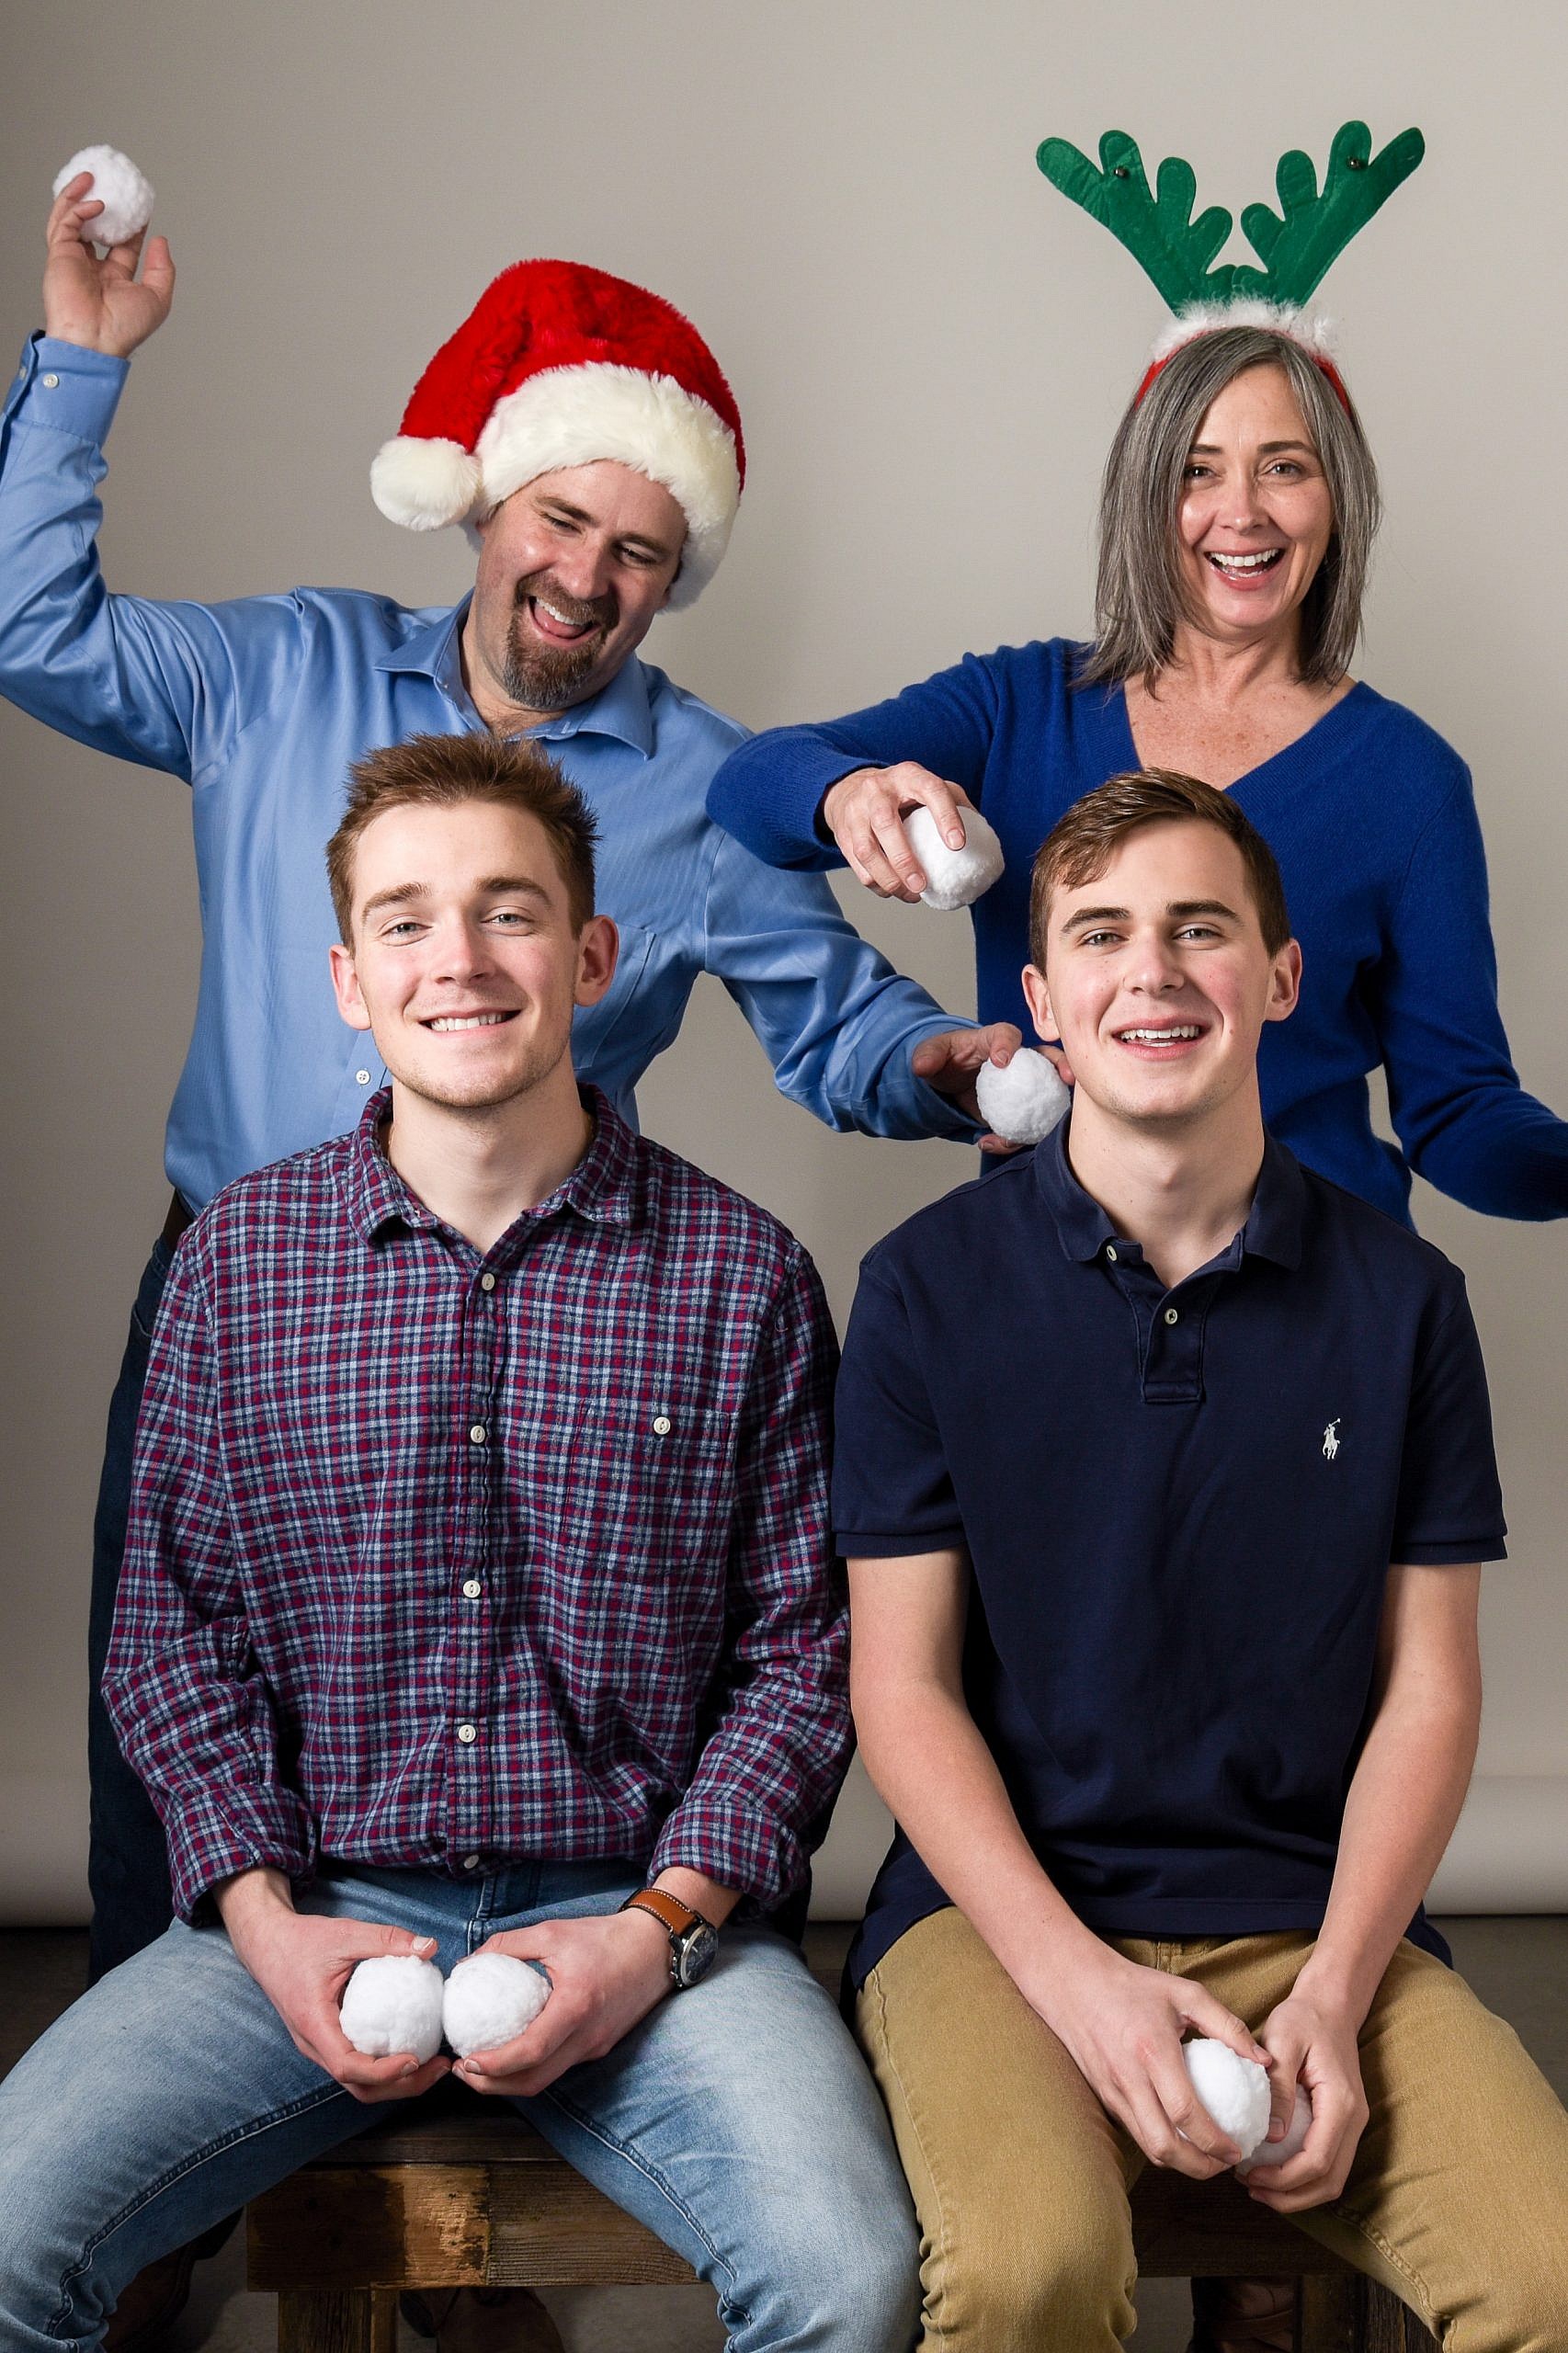 Family Holiday pictures in the studio - Portland, Oregon - Anna Graf Photography